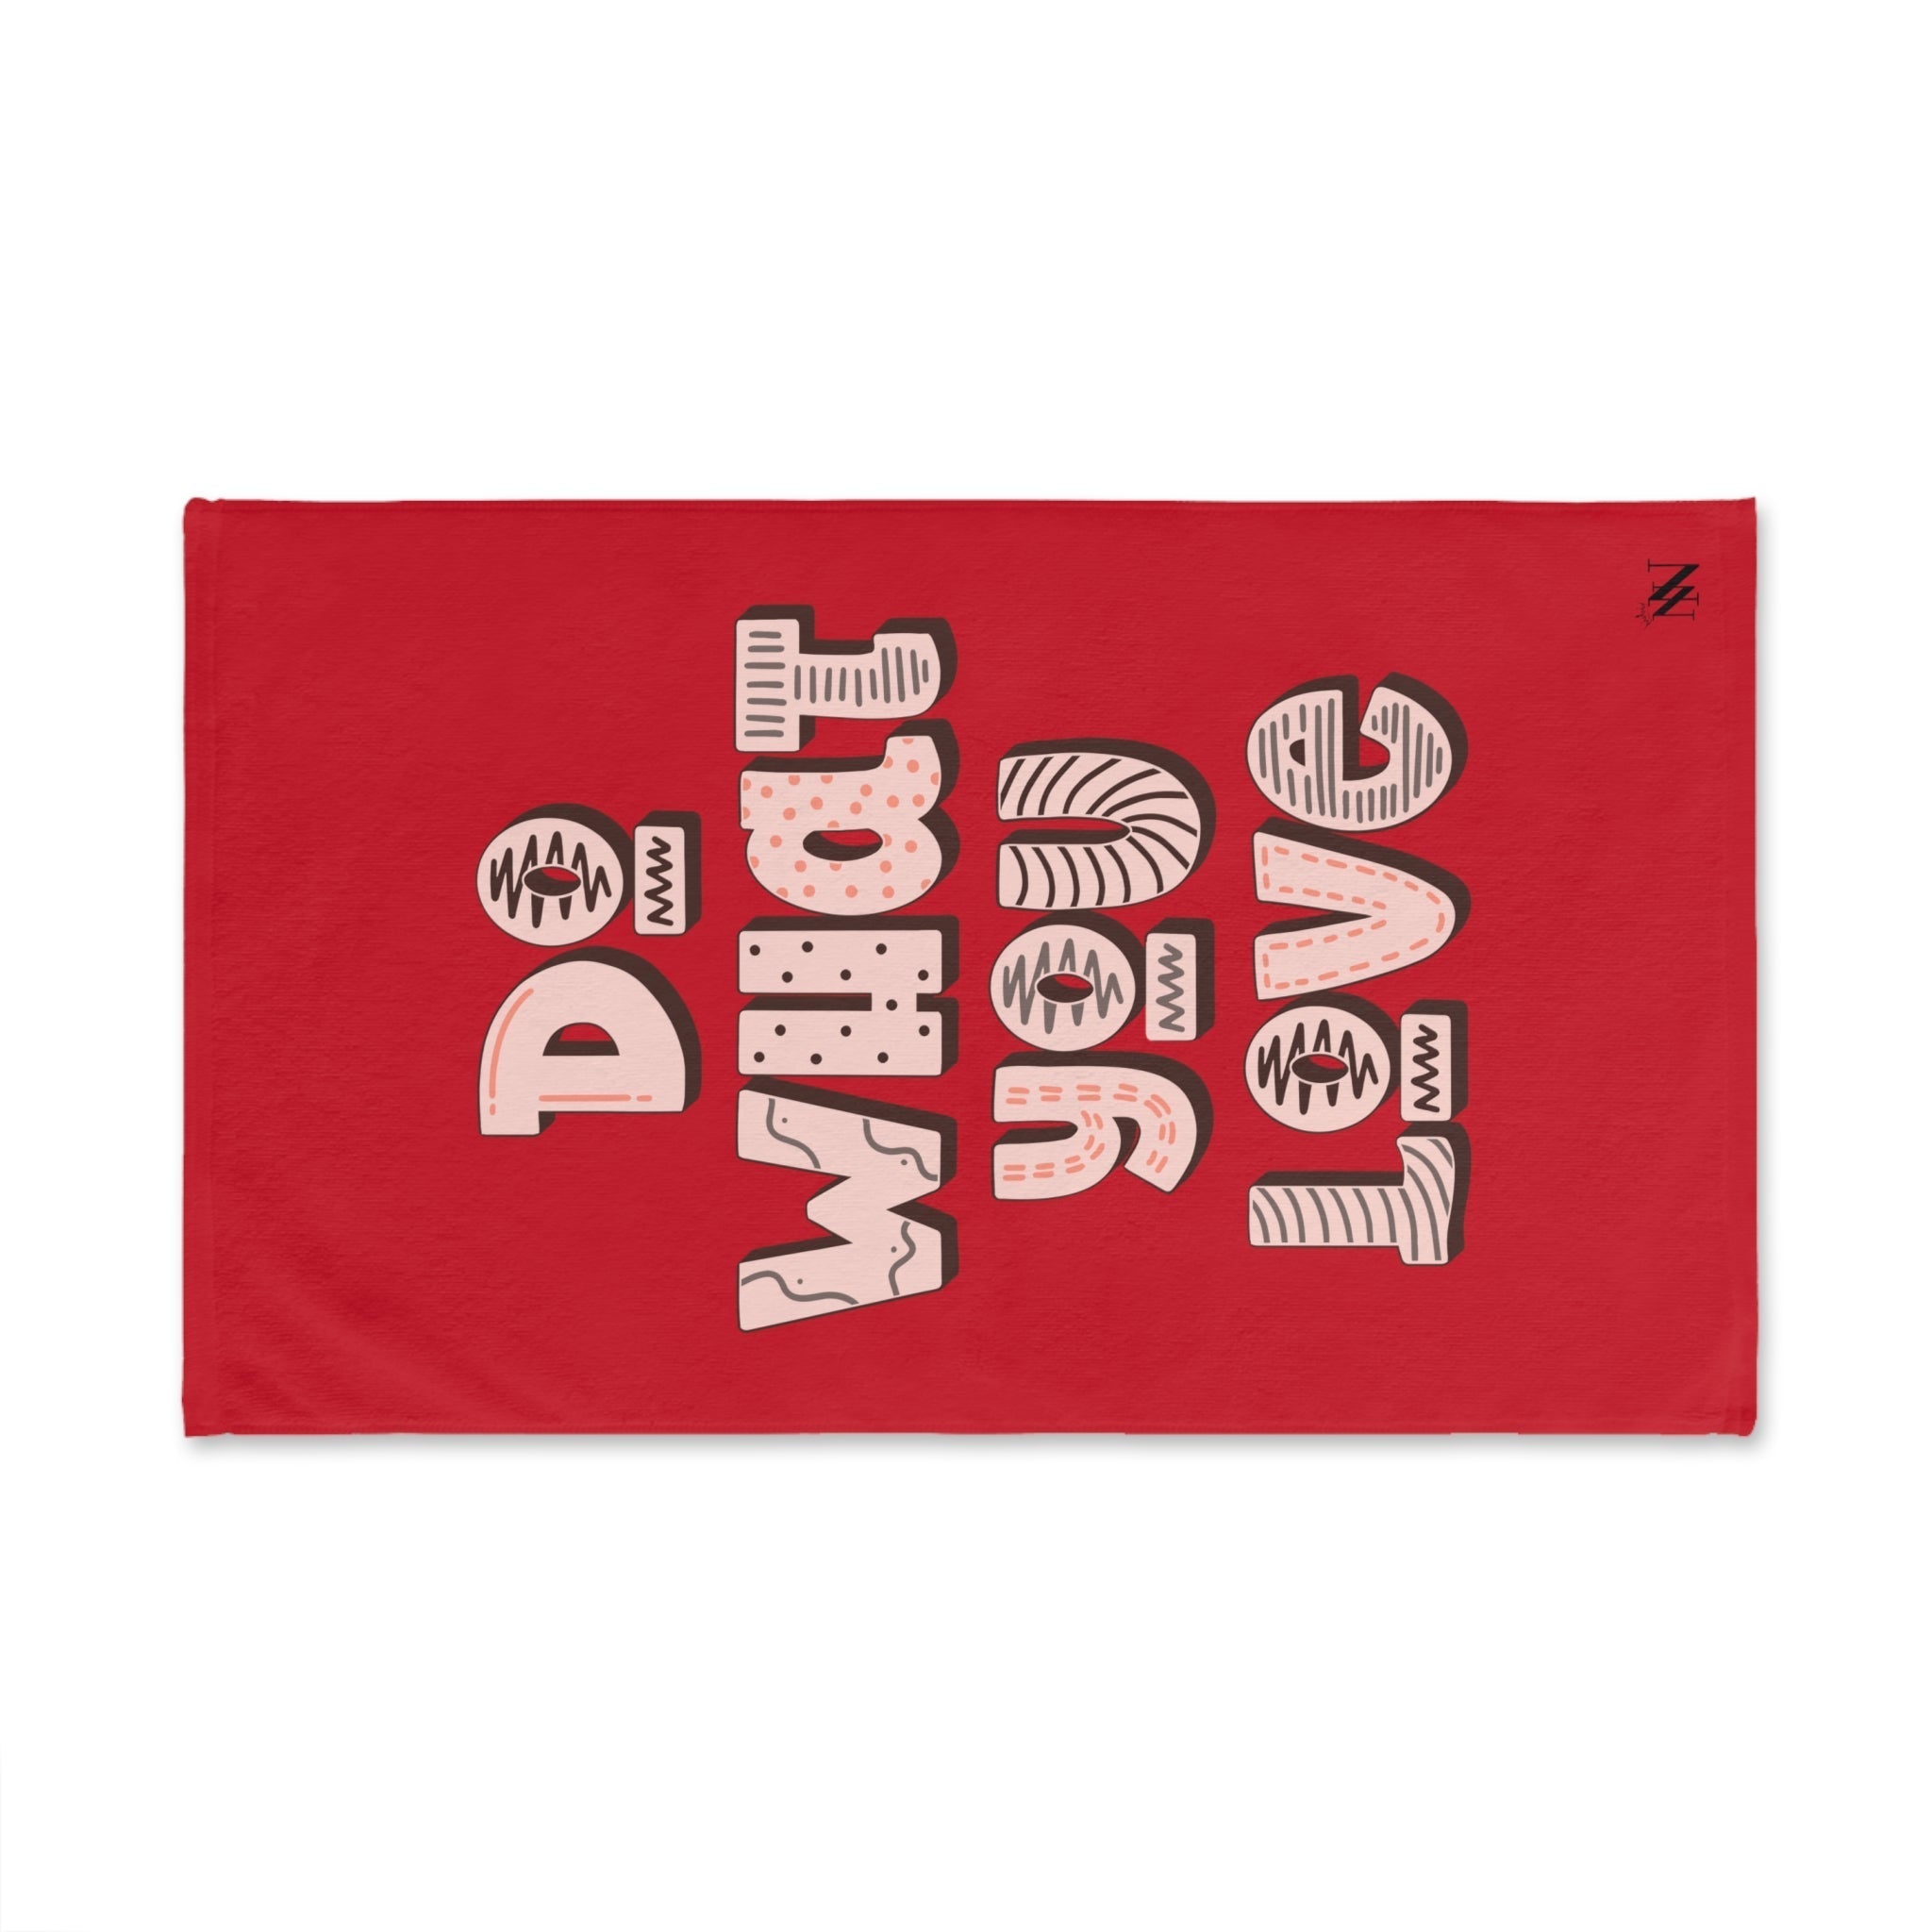 What DO Love You Red | Sexy Gifts for Boyfriend, Funny Towel Romantic Gift for Wedding Couple Fiance First Year 2nd Anniversary Valentines, Party Gag Gifts, Joke Humor Cloth for Husband Men BF NECTAR NAPKINS